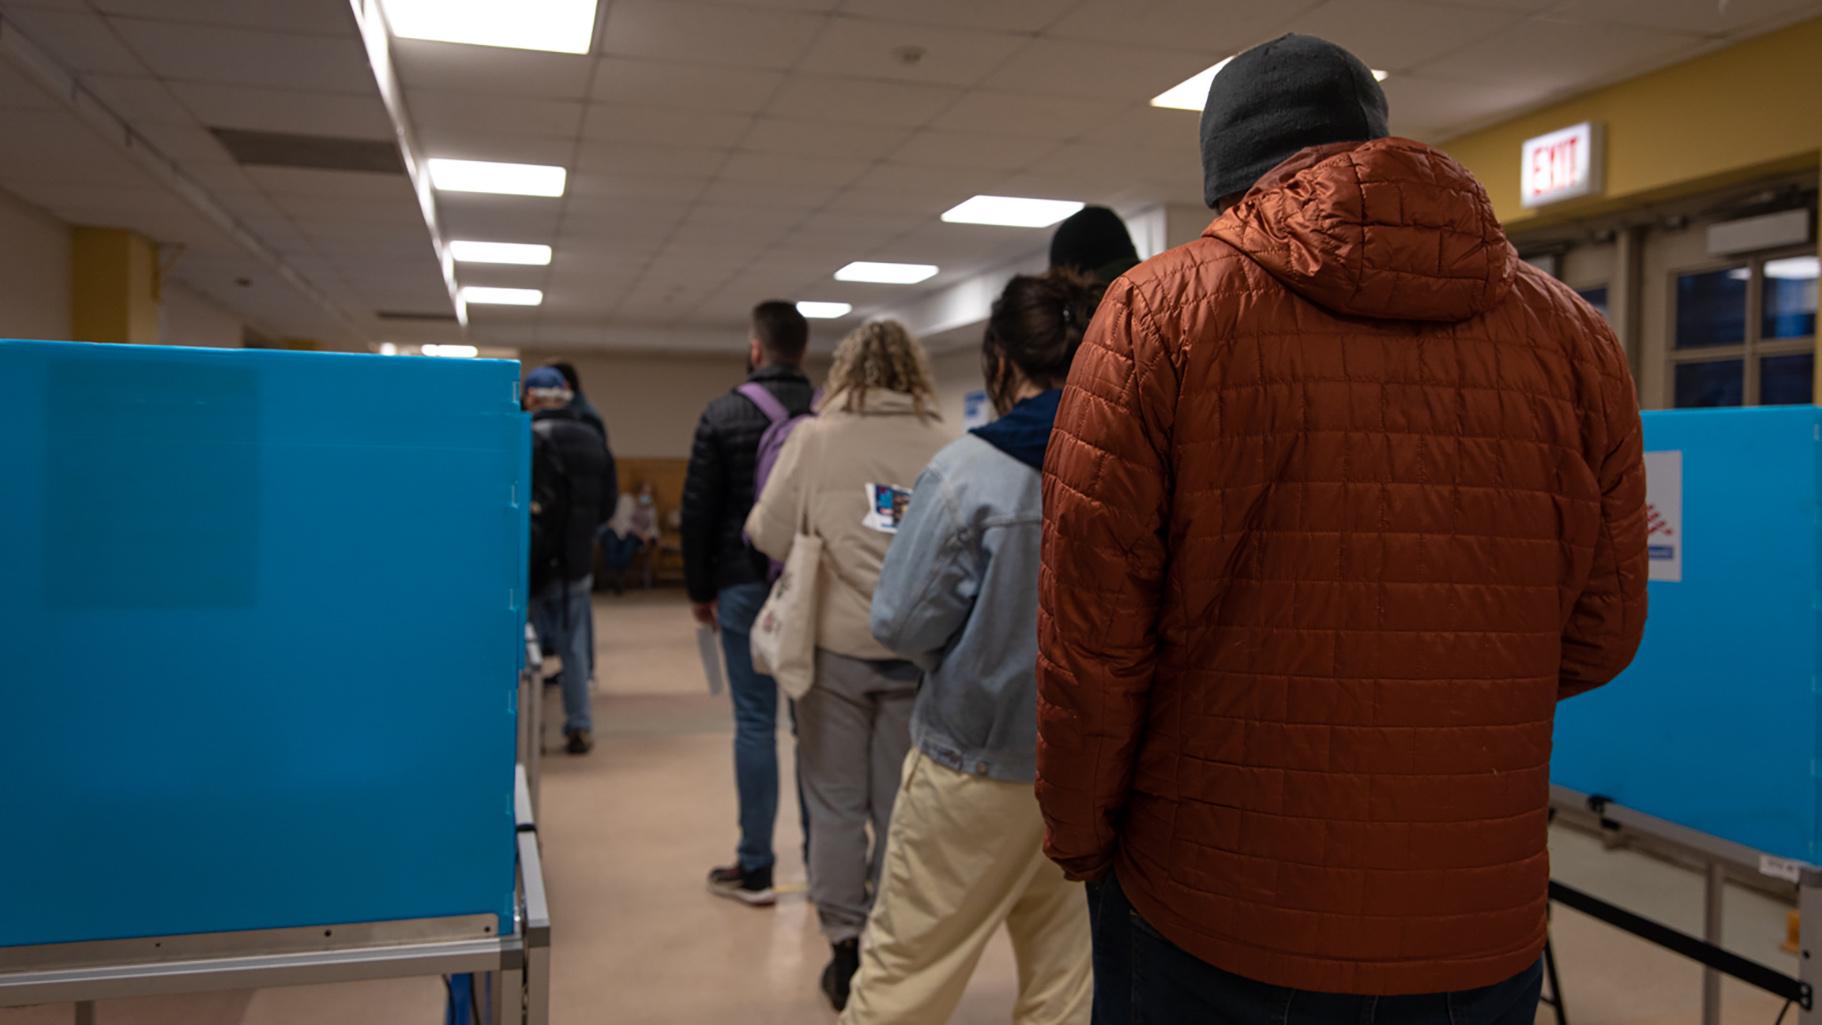 Registered voters in the 48th Ward line up inside the Broadway Armory Park polling station in anticipation to cast their ballots on Feb. 28, 2023. (Michael Izquierdo / WTTW News)